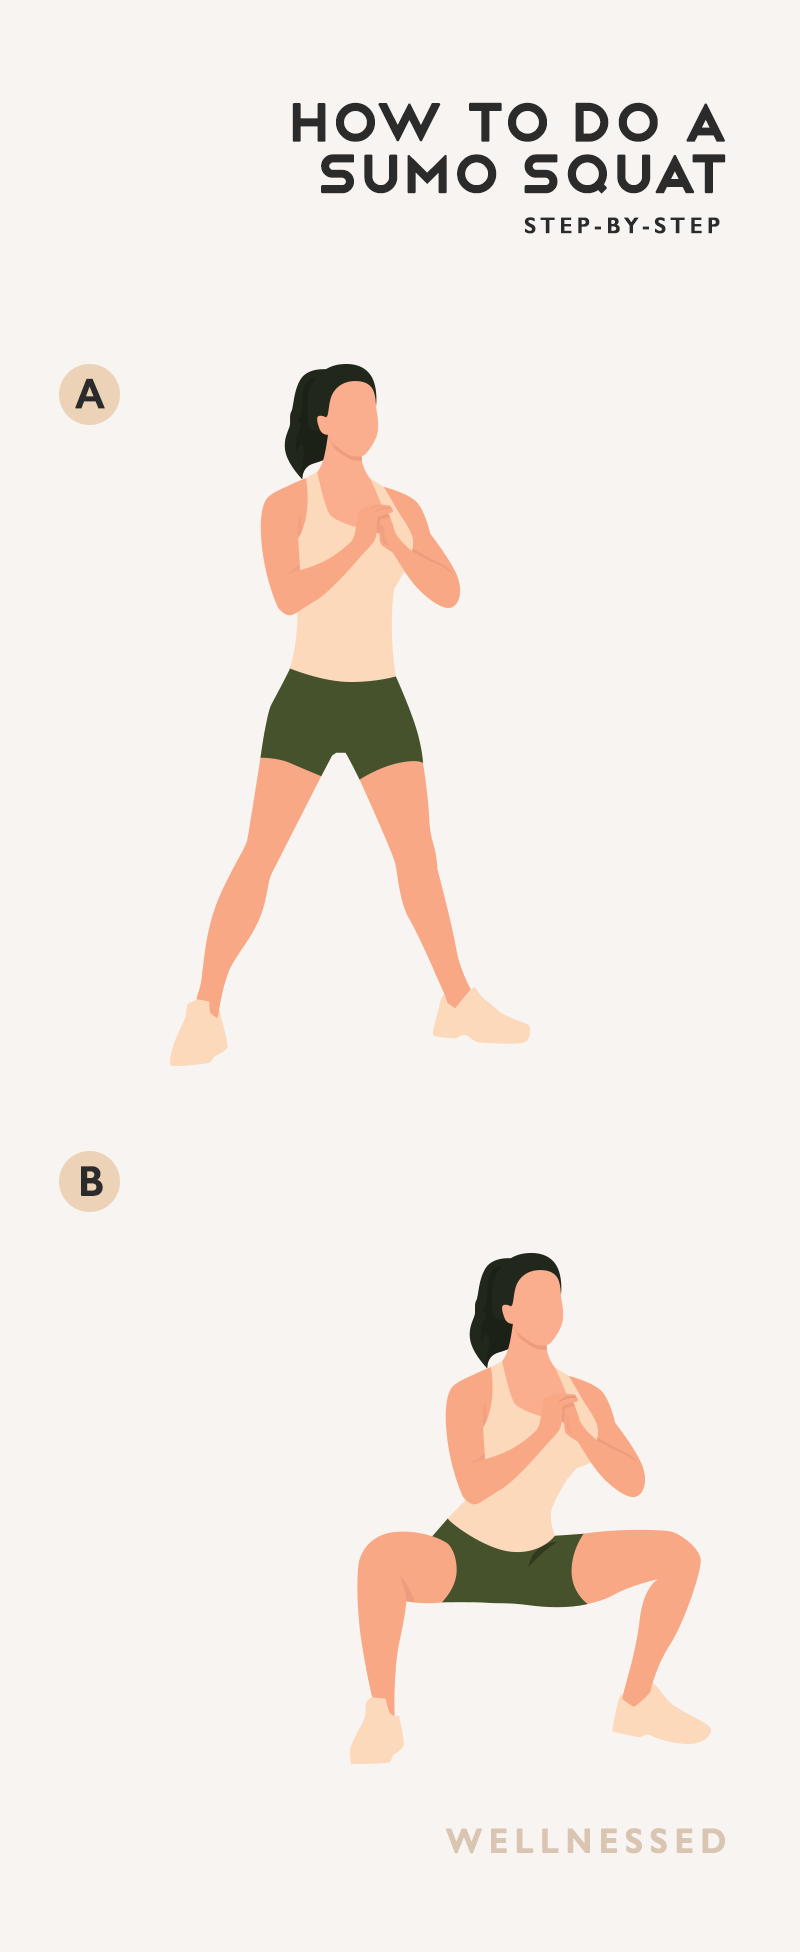 Step-by-step illustration of how to do a sumo squat